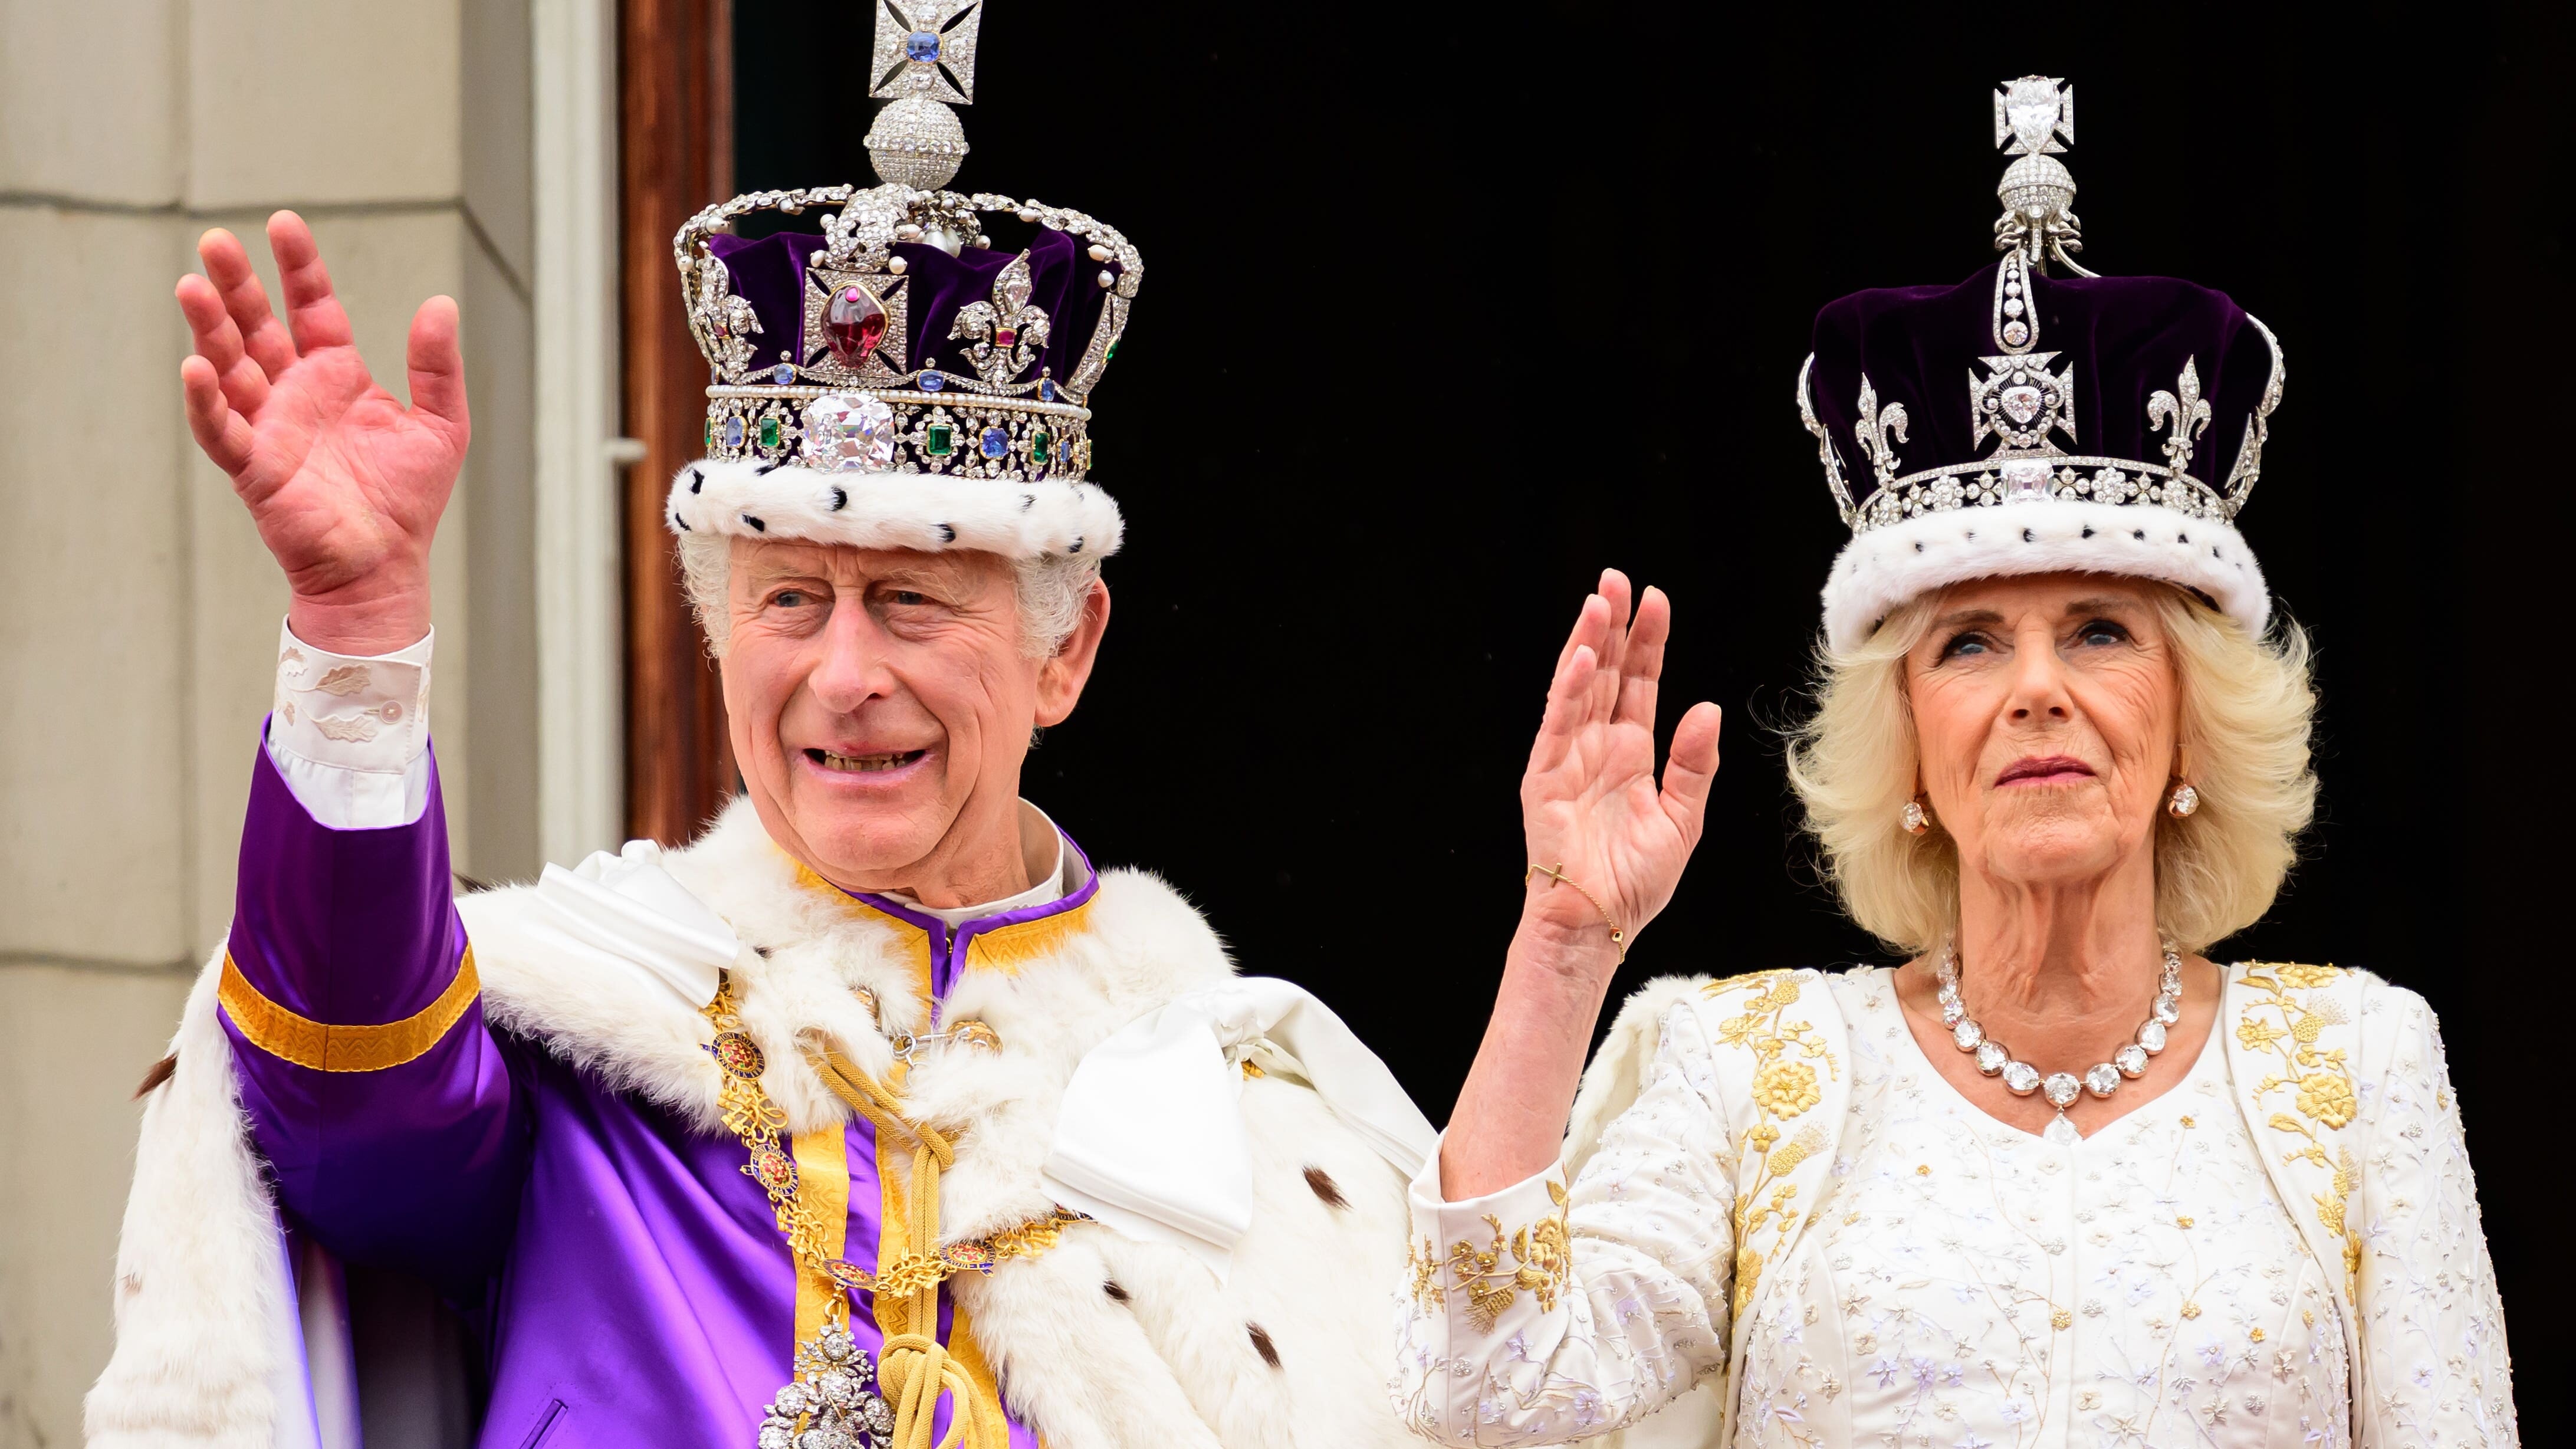 King Charles and Queen Camilla on the balcony of Buckingham Palace following the coronation